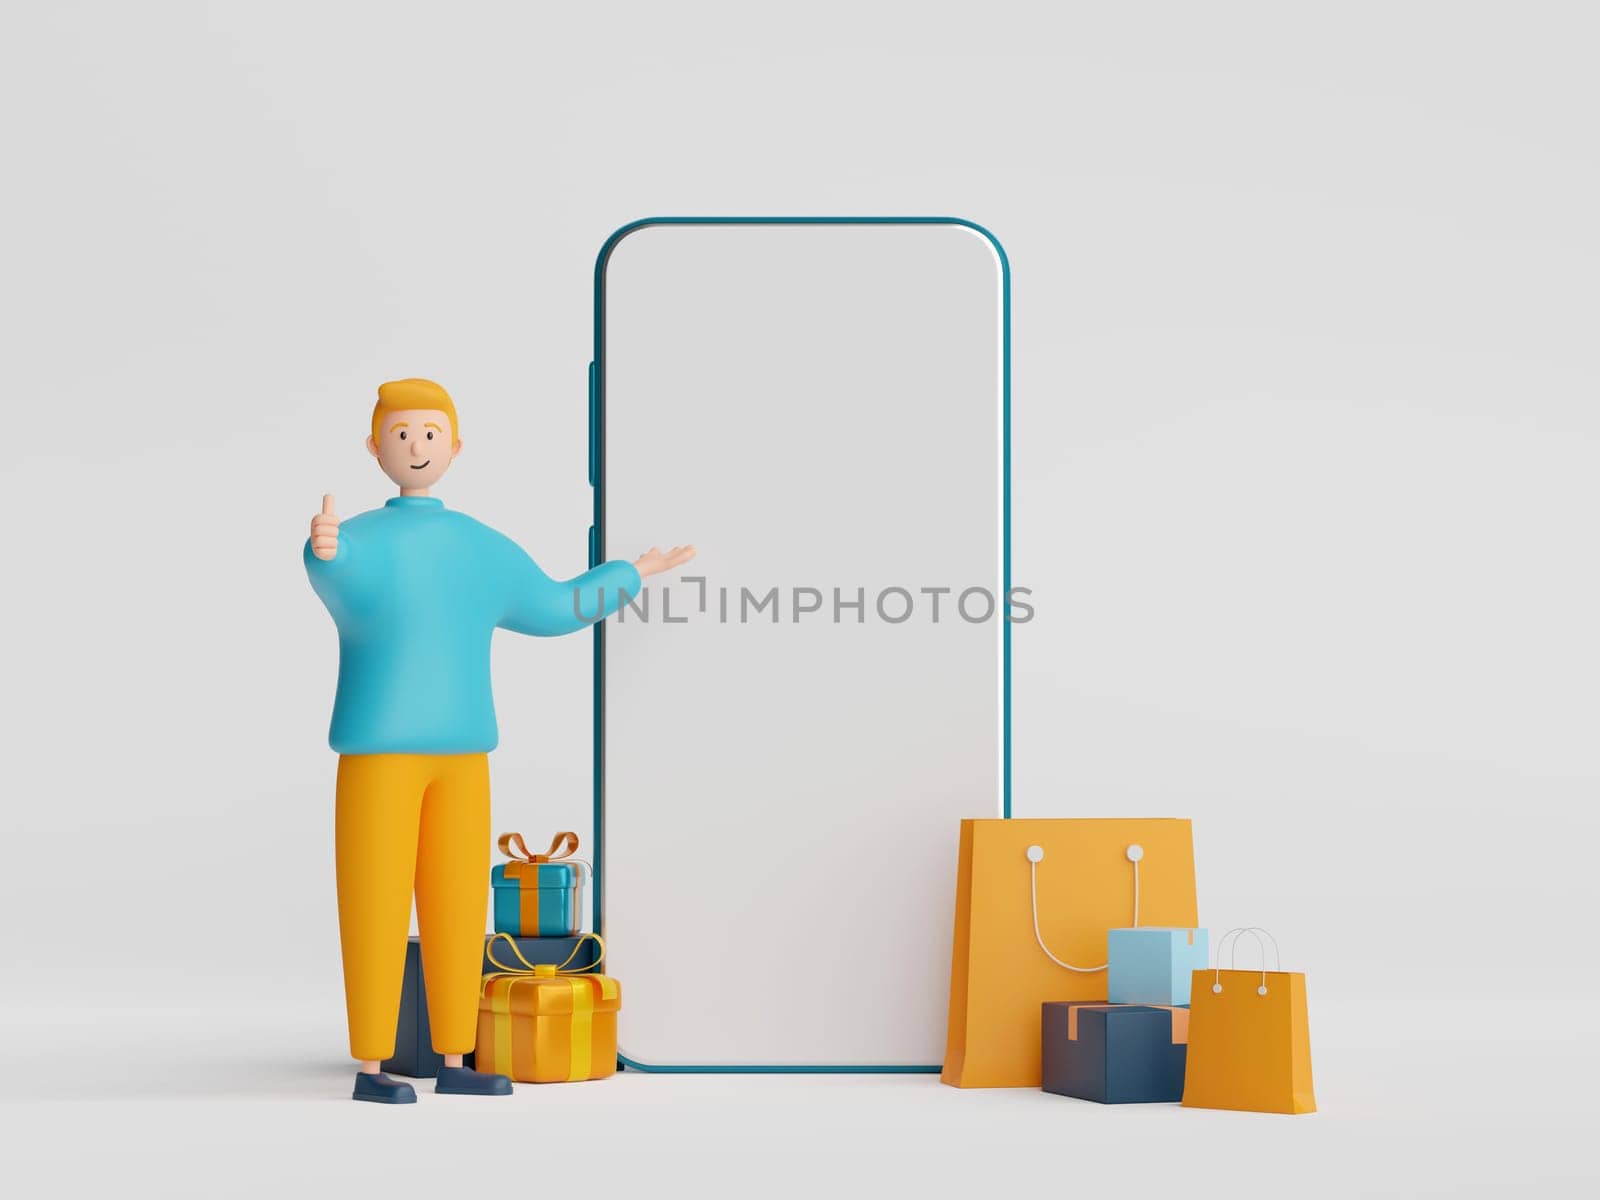 3d illustration of businessman character standing with blank screen smartphone and gift box, shopping bag.